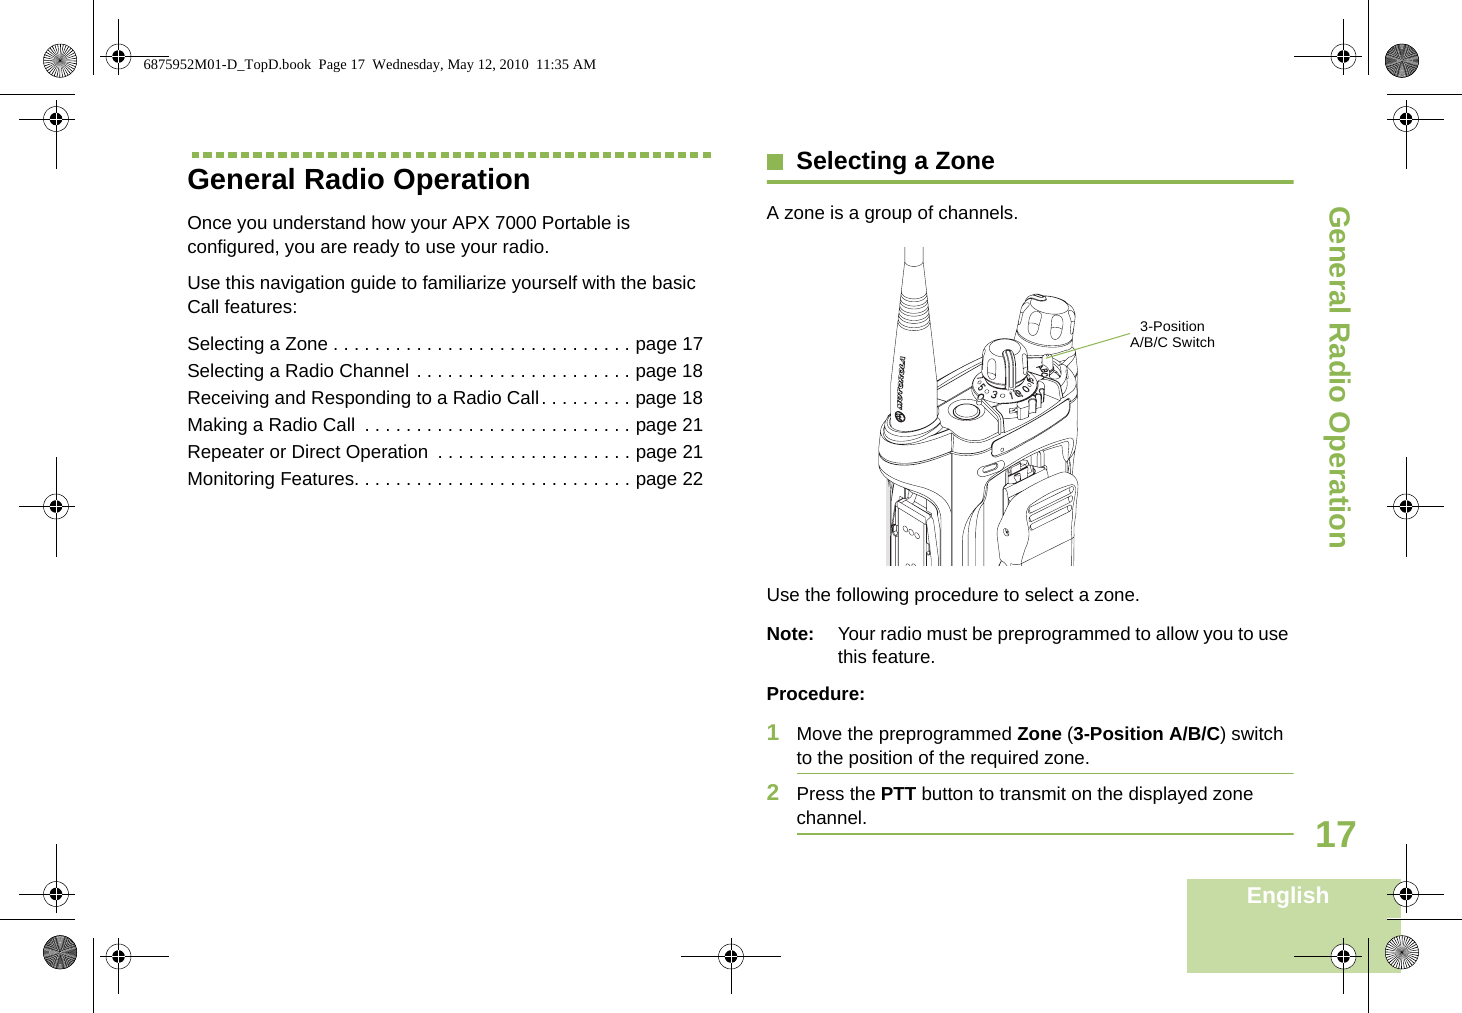 General Radio OperationEnglish17General Radio OperationOnce you understand how your APX 7000 Portable is configured, you are ready to use your radio.Use this navigation guide to familiarize yourself with the basic Call features:Selecting a Zone . . . . . . . . . . . . . . . . . . . . . . . . . . . . . page 17Selecting a Radio Channel . . . . . . . . . . . . . . . . . . . . . page 18Receiving and Responding to a Radio Call. . . . . . . . . page 18Making a Radio Call  . . . . . . . . . . . . . . . . . . . . . . . . . . page 21Repeater or Direct Operation  . . . . . . . . . . . . . . . . . . . page 21Monitoring Features. . . . . . . . . . . . . . . . . . . . . . . . . . . page 22Selecting a ZoneA zone is a group of channels.Use the following procedure to select a zone.Note: Your radio must be preprogrammed to allow you to use this feature.Procedure:1Move the preprogrammed Zone (3-Position A/B/C) switch to the position of the required zone.2Press the PTT button to transmit on the displayed zone channel.  3-Position A/B/C Switch6875952M01-D_TopD.book  Page 17  Wednesday, May 12, 2010  11:35 AM